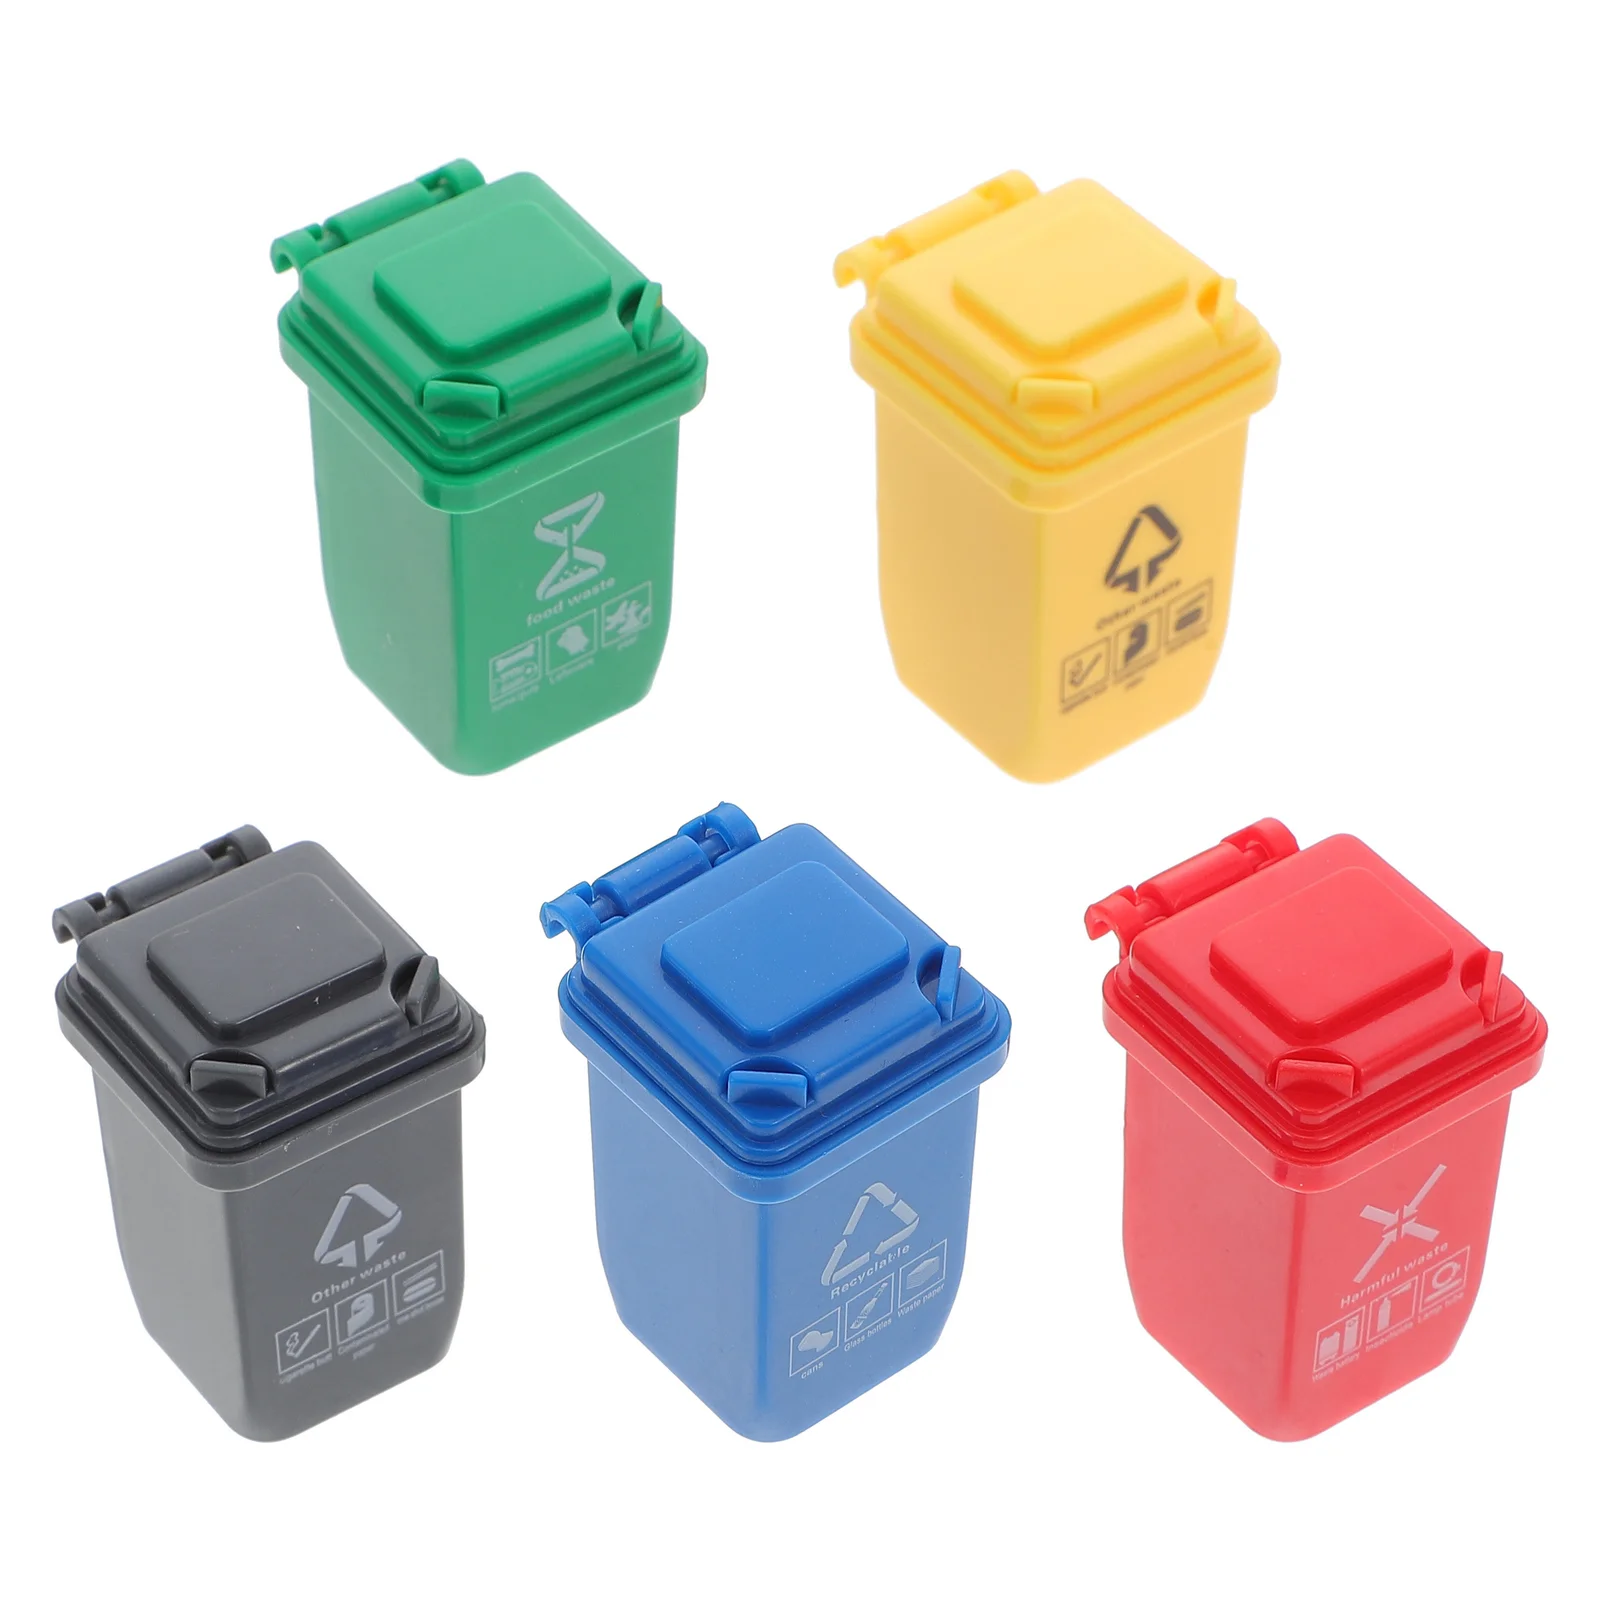 Tiny Trash Can Vehicle Garbage Bin Small Trash Can Miniature Trash Can Garbage Pail Model Miniature Scene Model 1 64 scale scene mat large parking lot for diecast car model vehicle scene display toy mouse pad scene show collection display